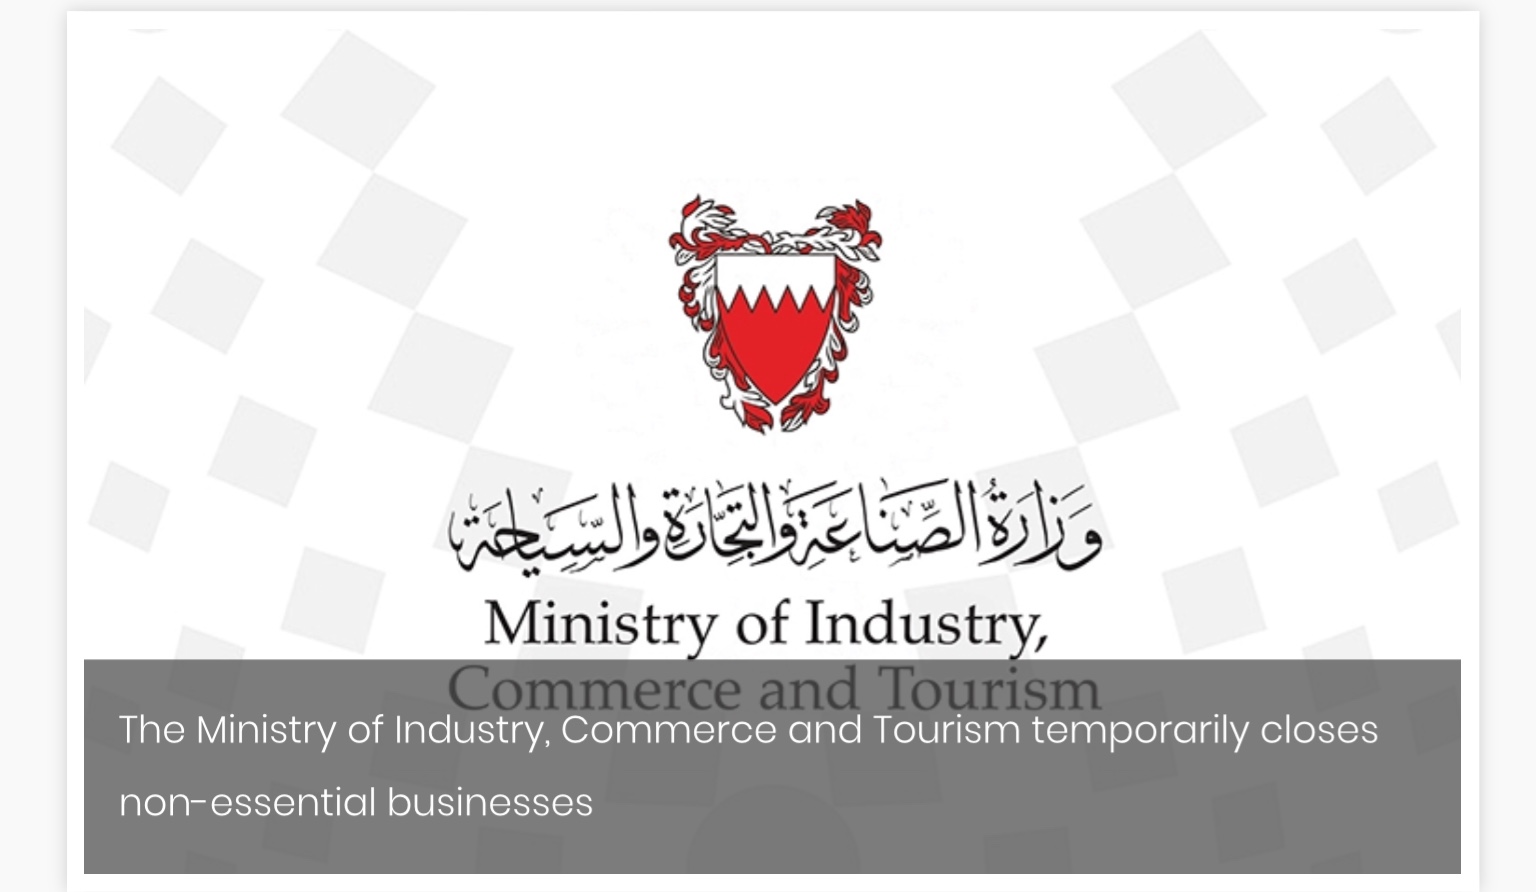 The Ministry of Industry, Commerce and Tourism temporarily closes non-essential businesses